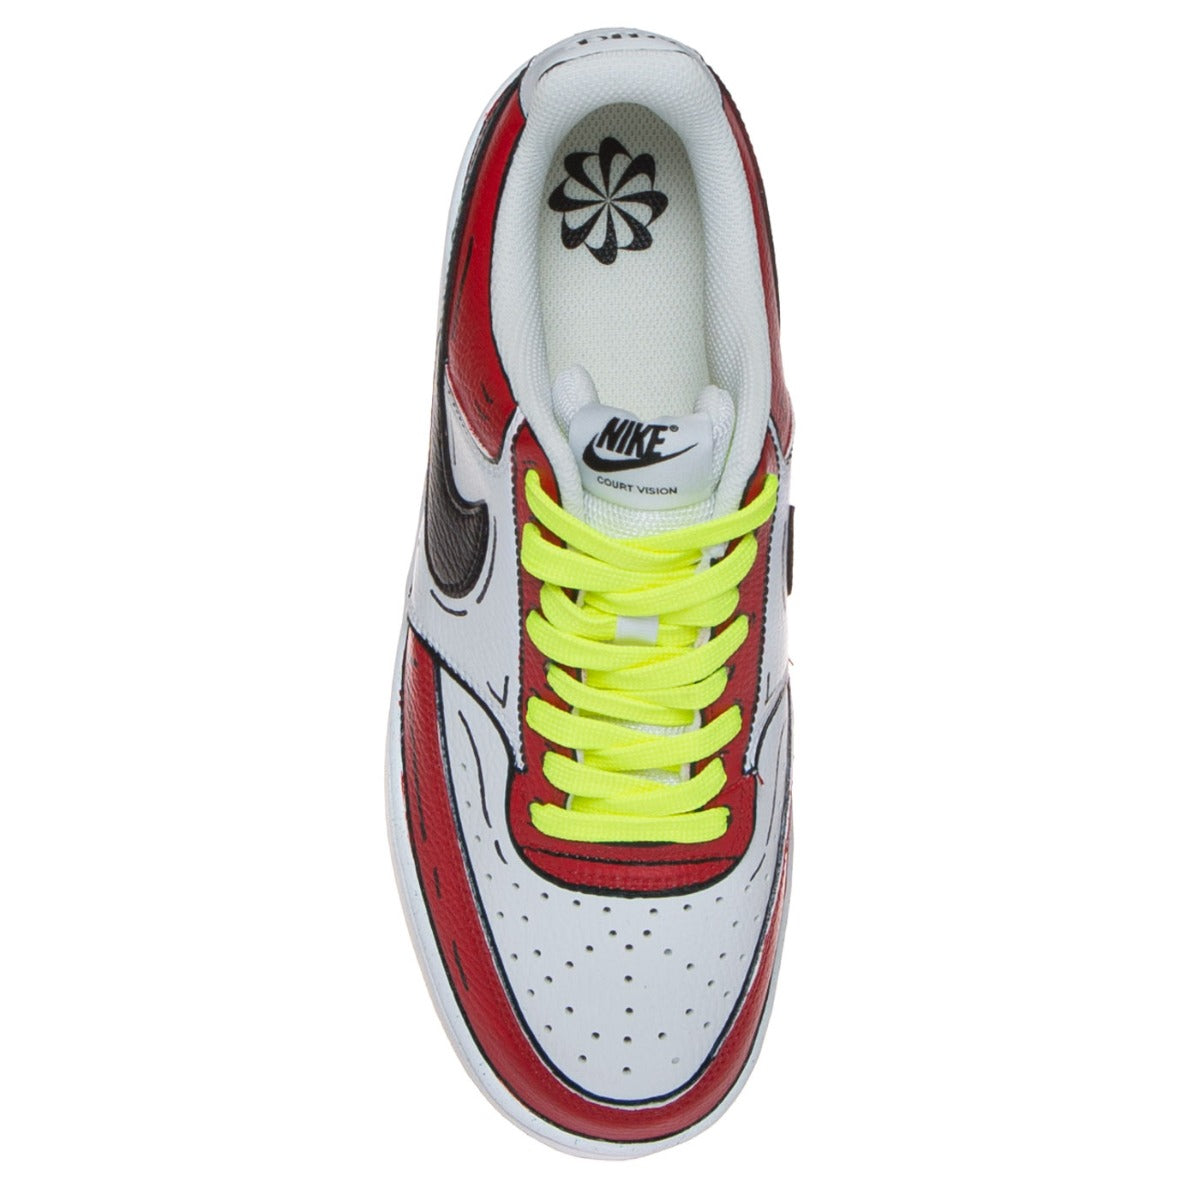 nike-court-vision-low-customized-sneakers-uomo-nv02-rosso